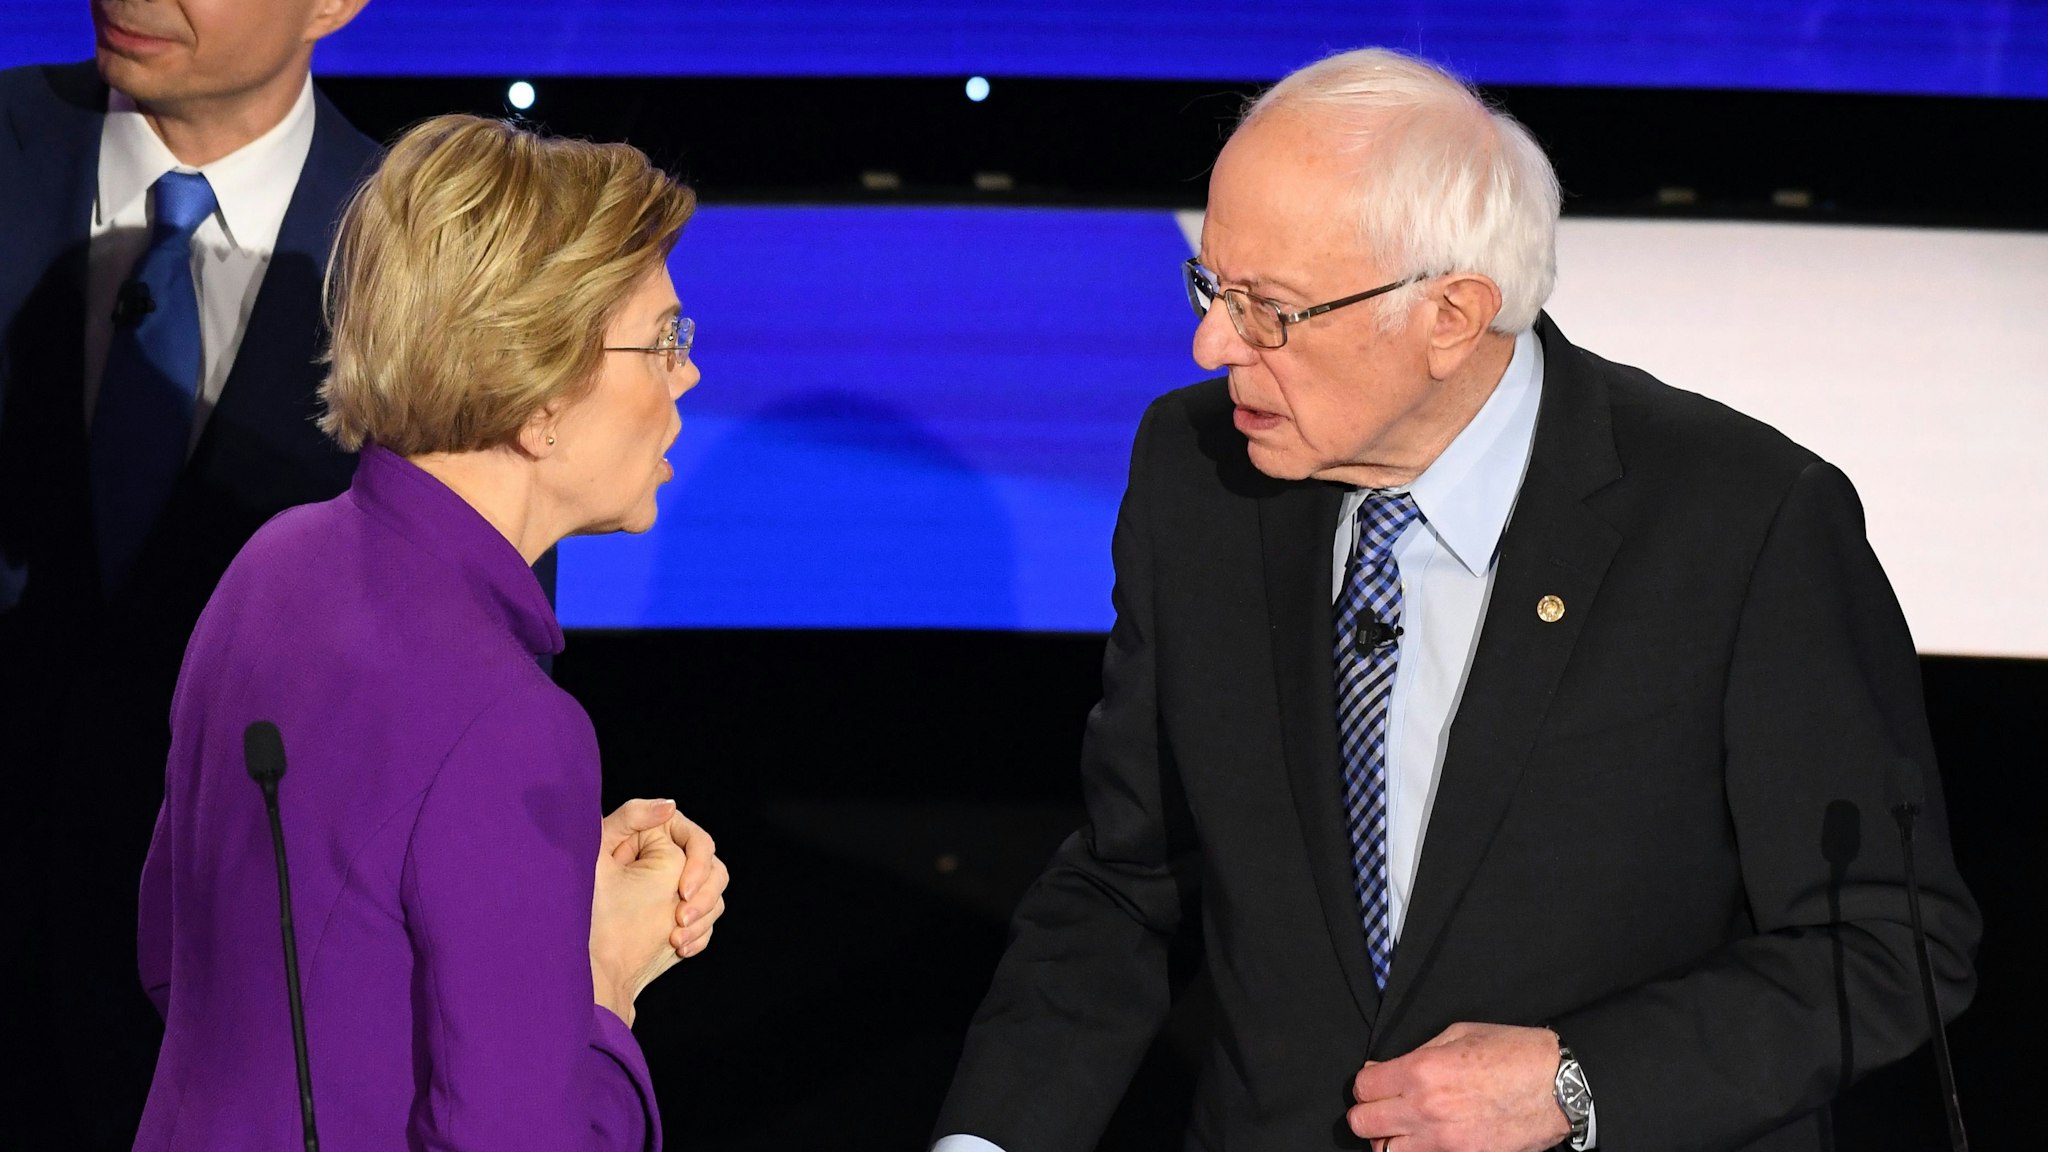 Democratic presidential hopeful Massachusetts Senator Elizabeth Warren and Vermont Senator Bernie Sanders speak after the seventh Democratic primary debate of the 2020 presidential campaign season co-hosted by CNN and the Des Moines Register at the Drake University campus in Des Moines, Iowa on January 14, 2020.